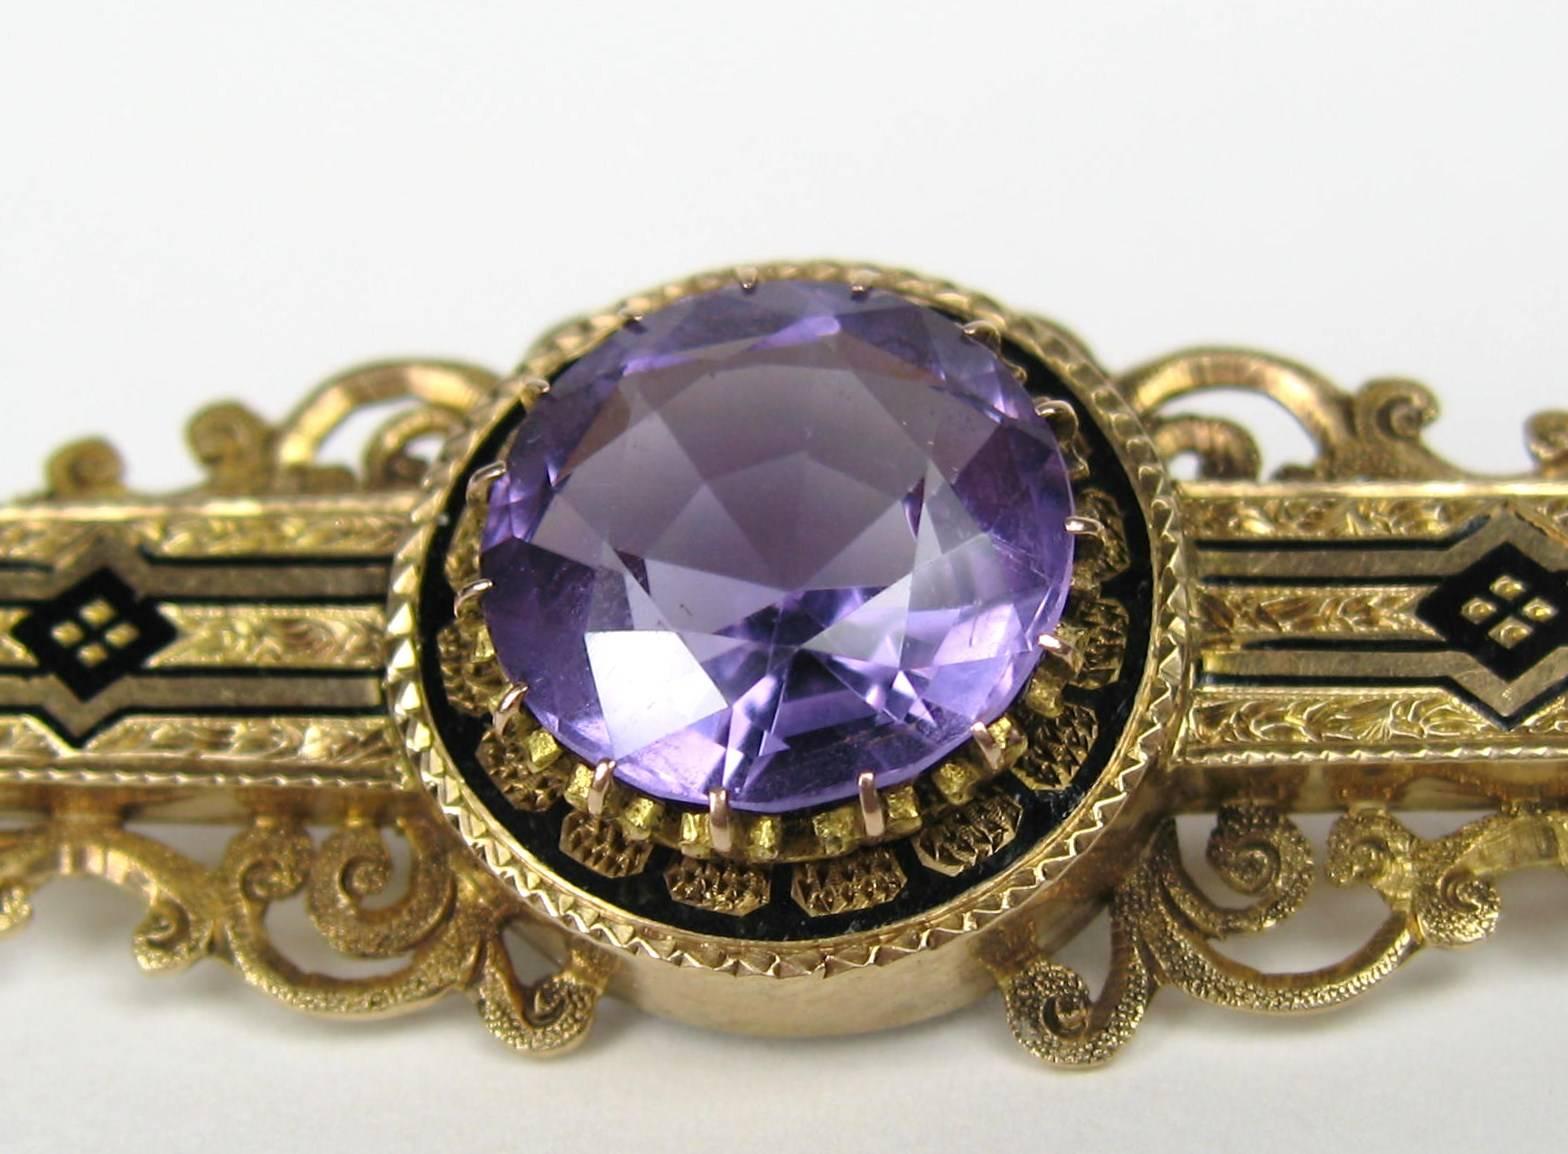 This is a 14K Gold Victorian Amethyst Bar Pin with Black Enamel work though it. It has a Claw set Large faceted Amethyst stone in the center. Measures 2.25 inches x .75 inches.  This is out of our massive collection of Hopi, Zuni, Navajo,